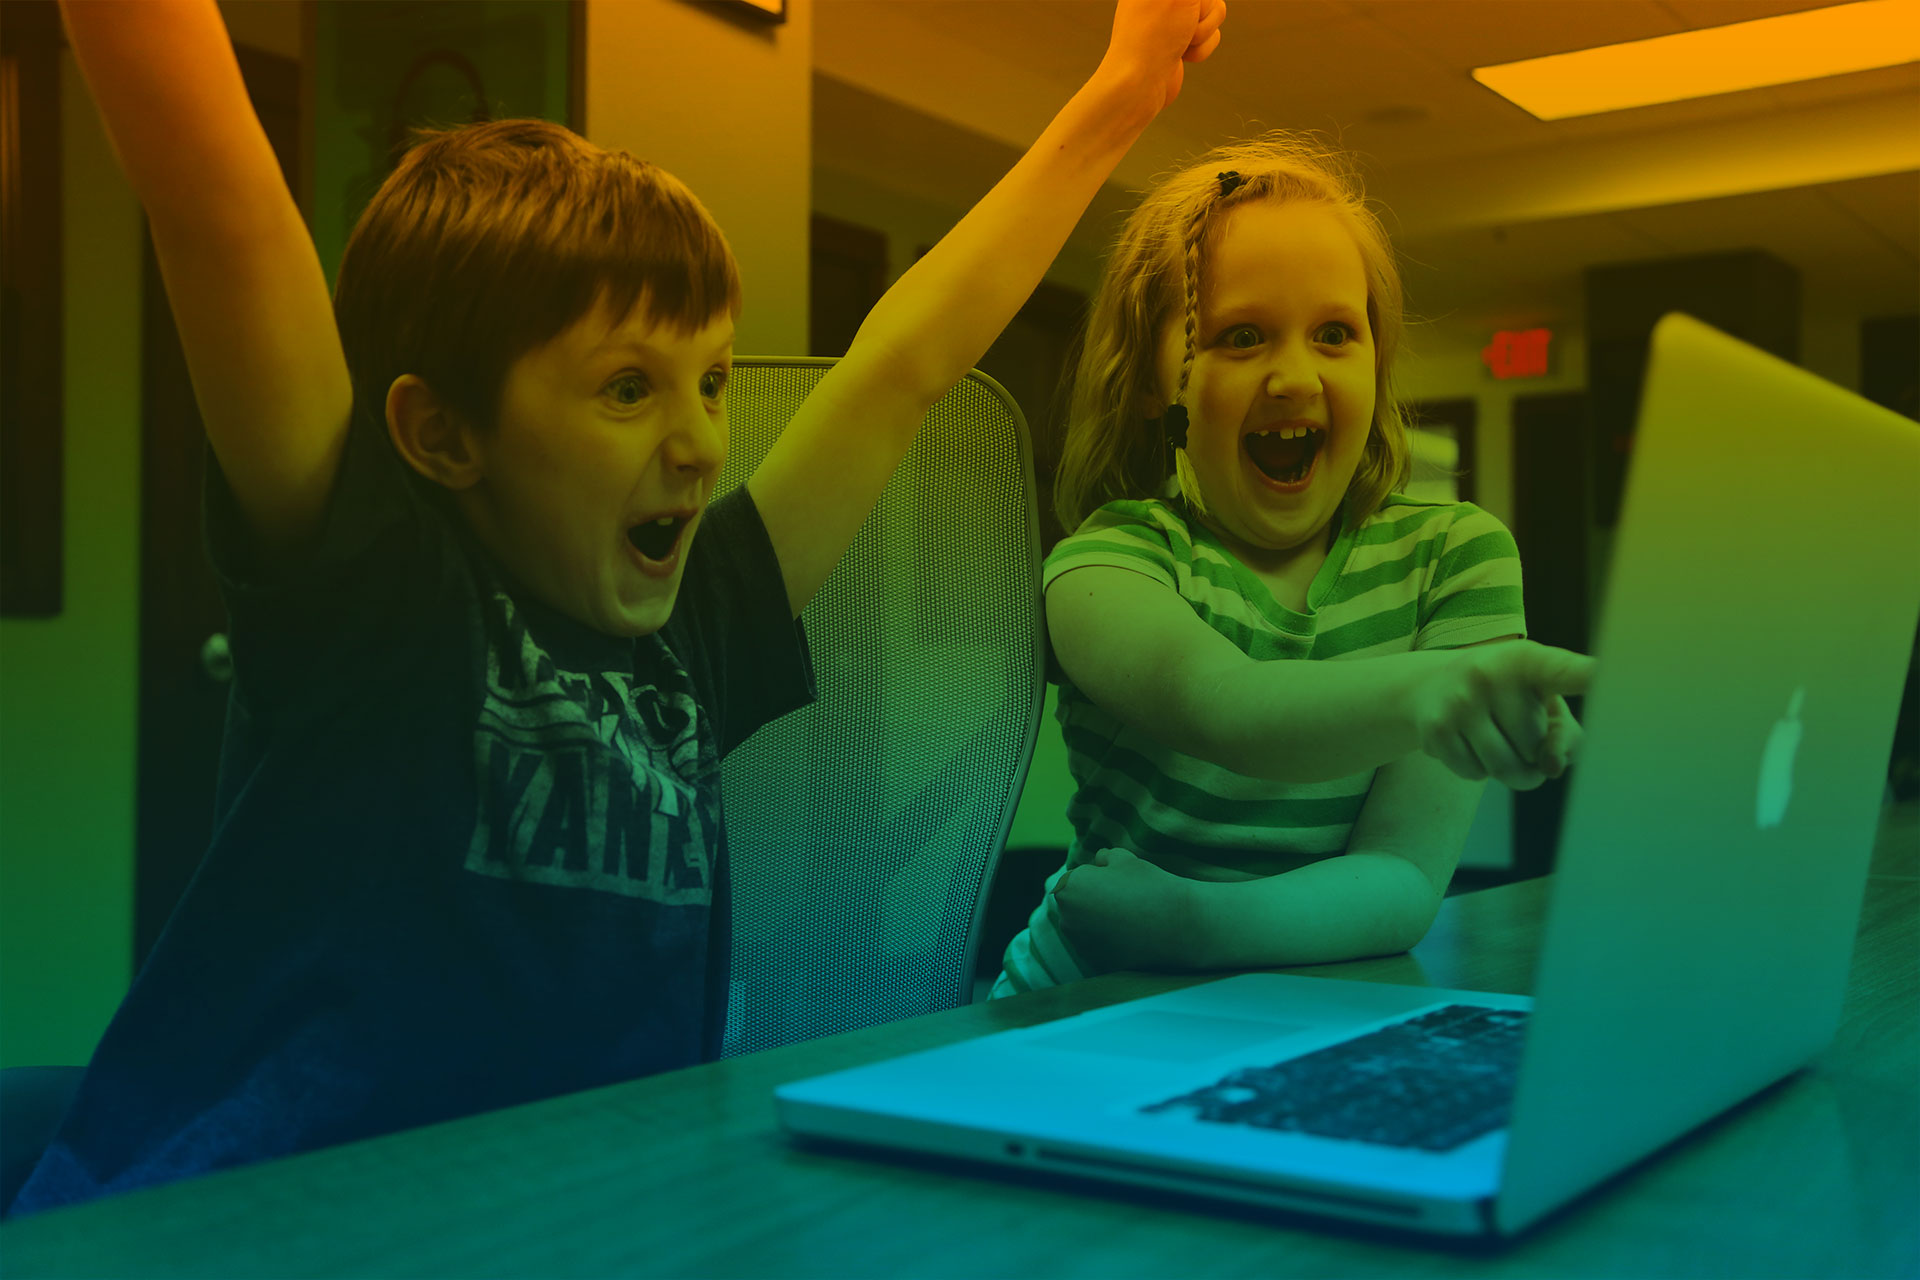 Article Cover Image: Two children excited by something on a laptop screen